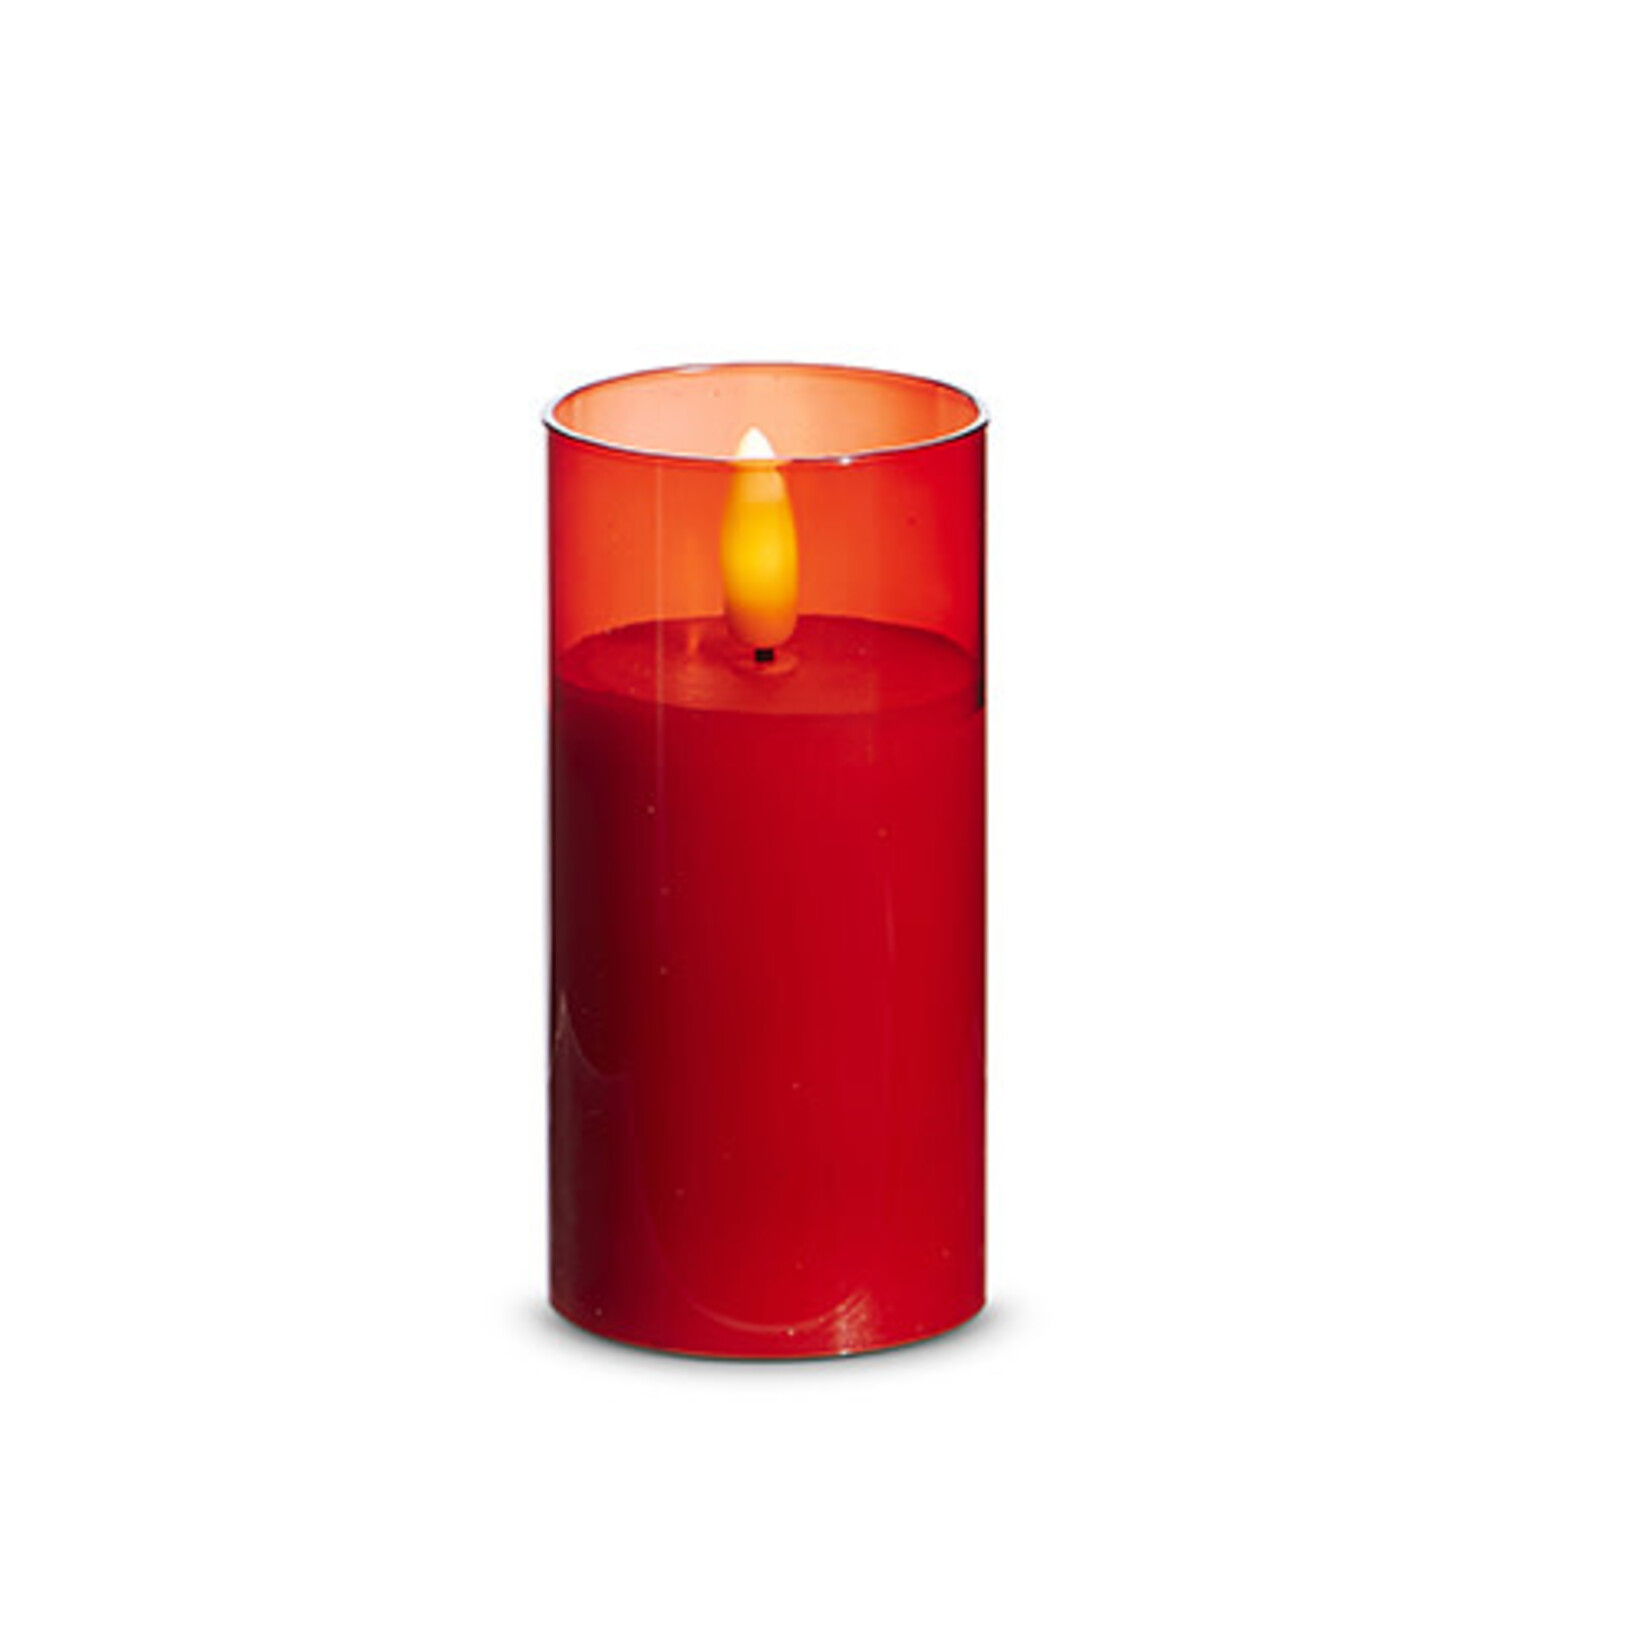 2x4 RED GLASS IVORY PILLAR CANDLE